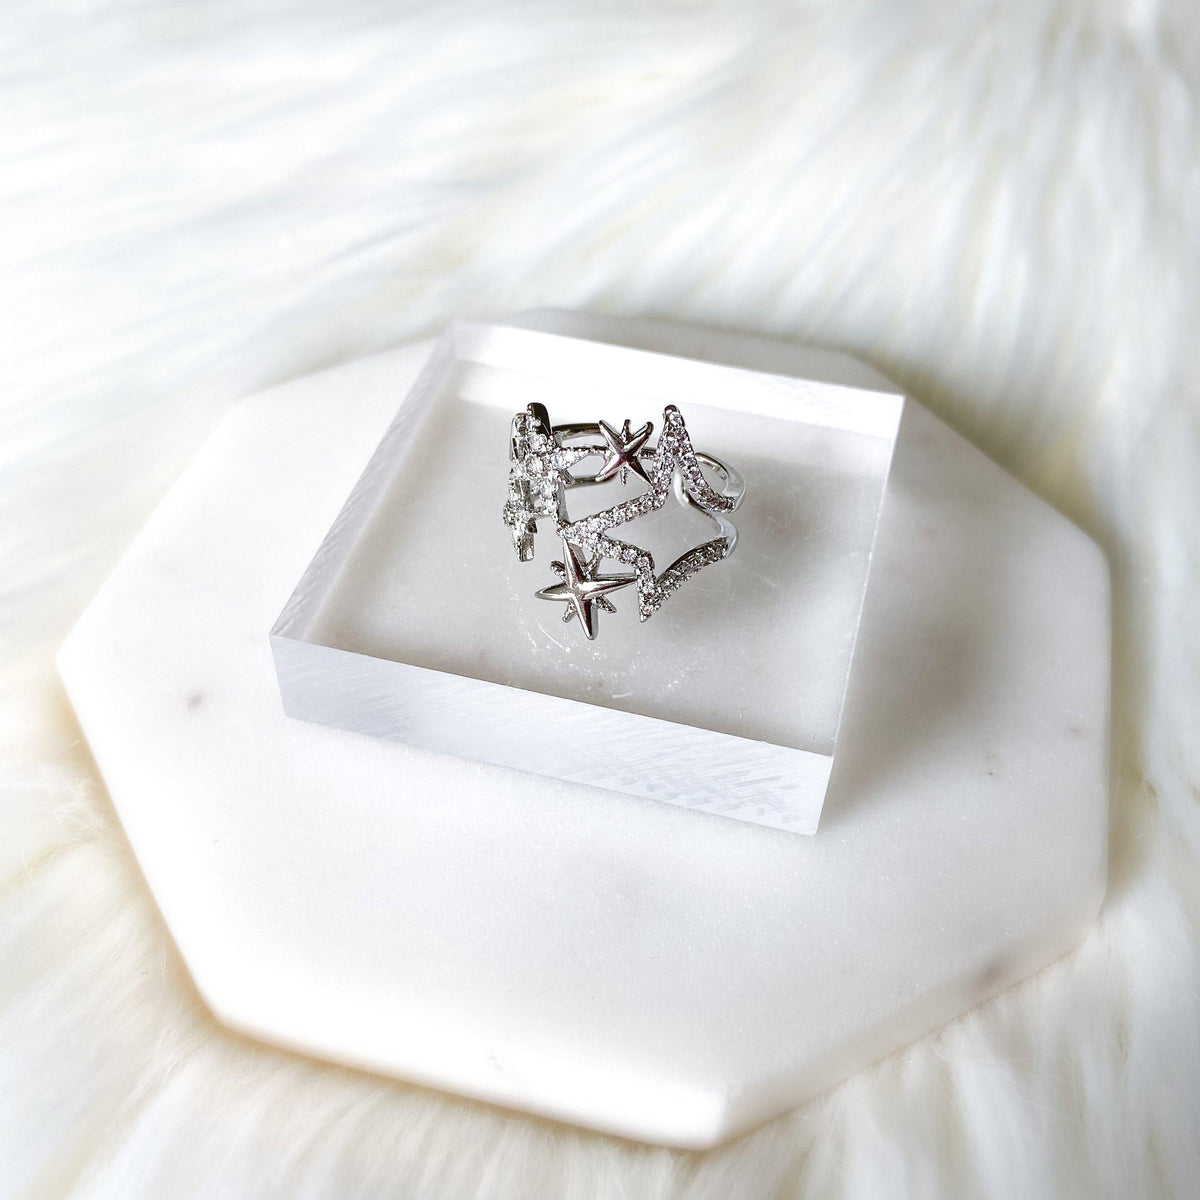 Super Nova Star Ring-Rings-The Songbird Collection